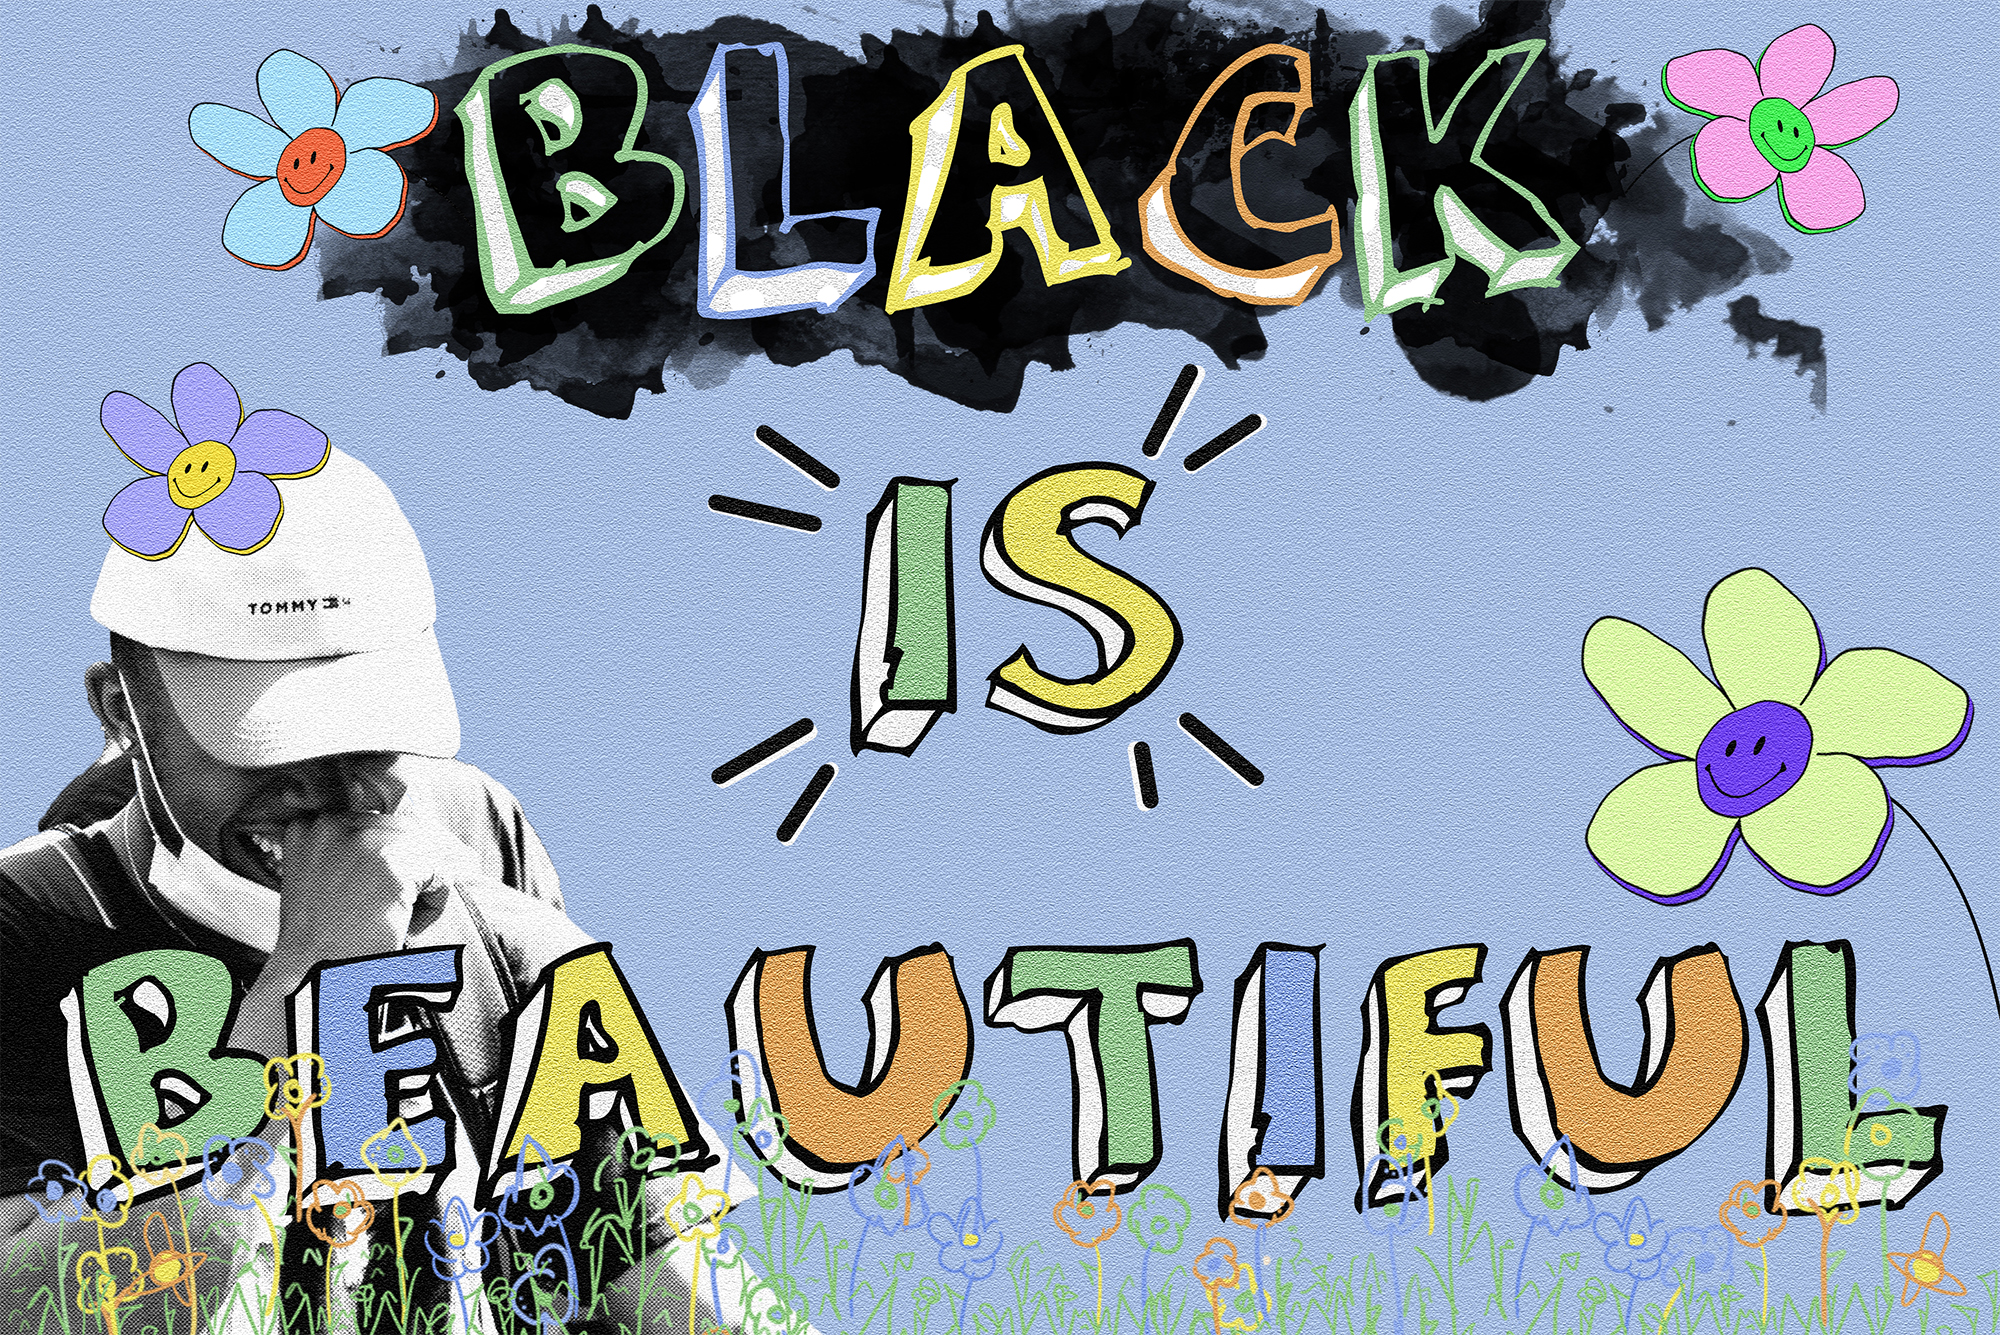 This image is a digital composite of an African American male laughing. The words "Black is Beautiful" are titled in a colorful font. 